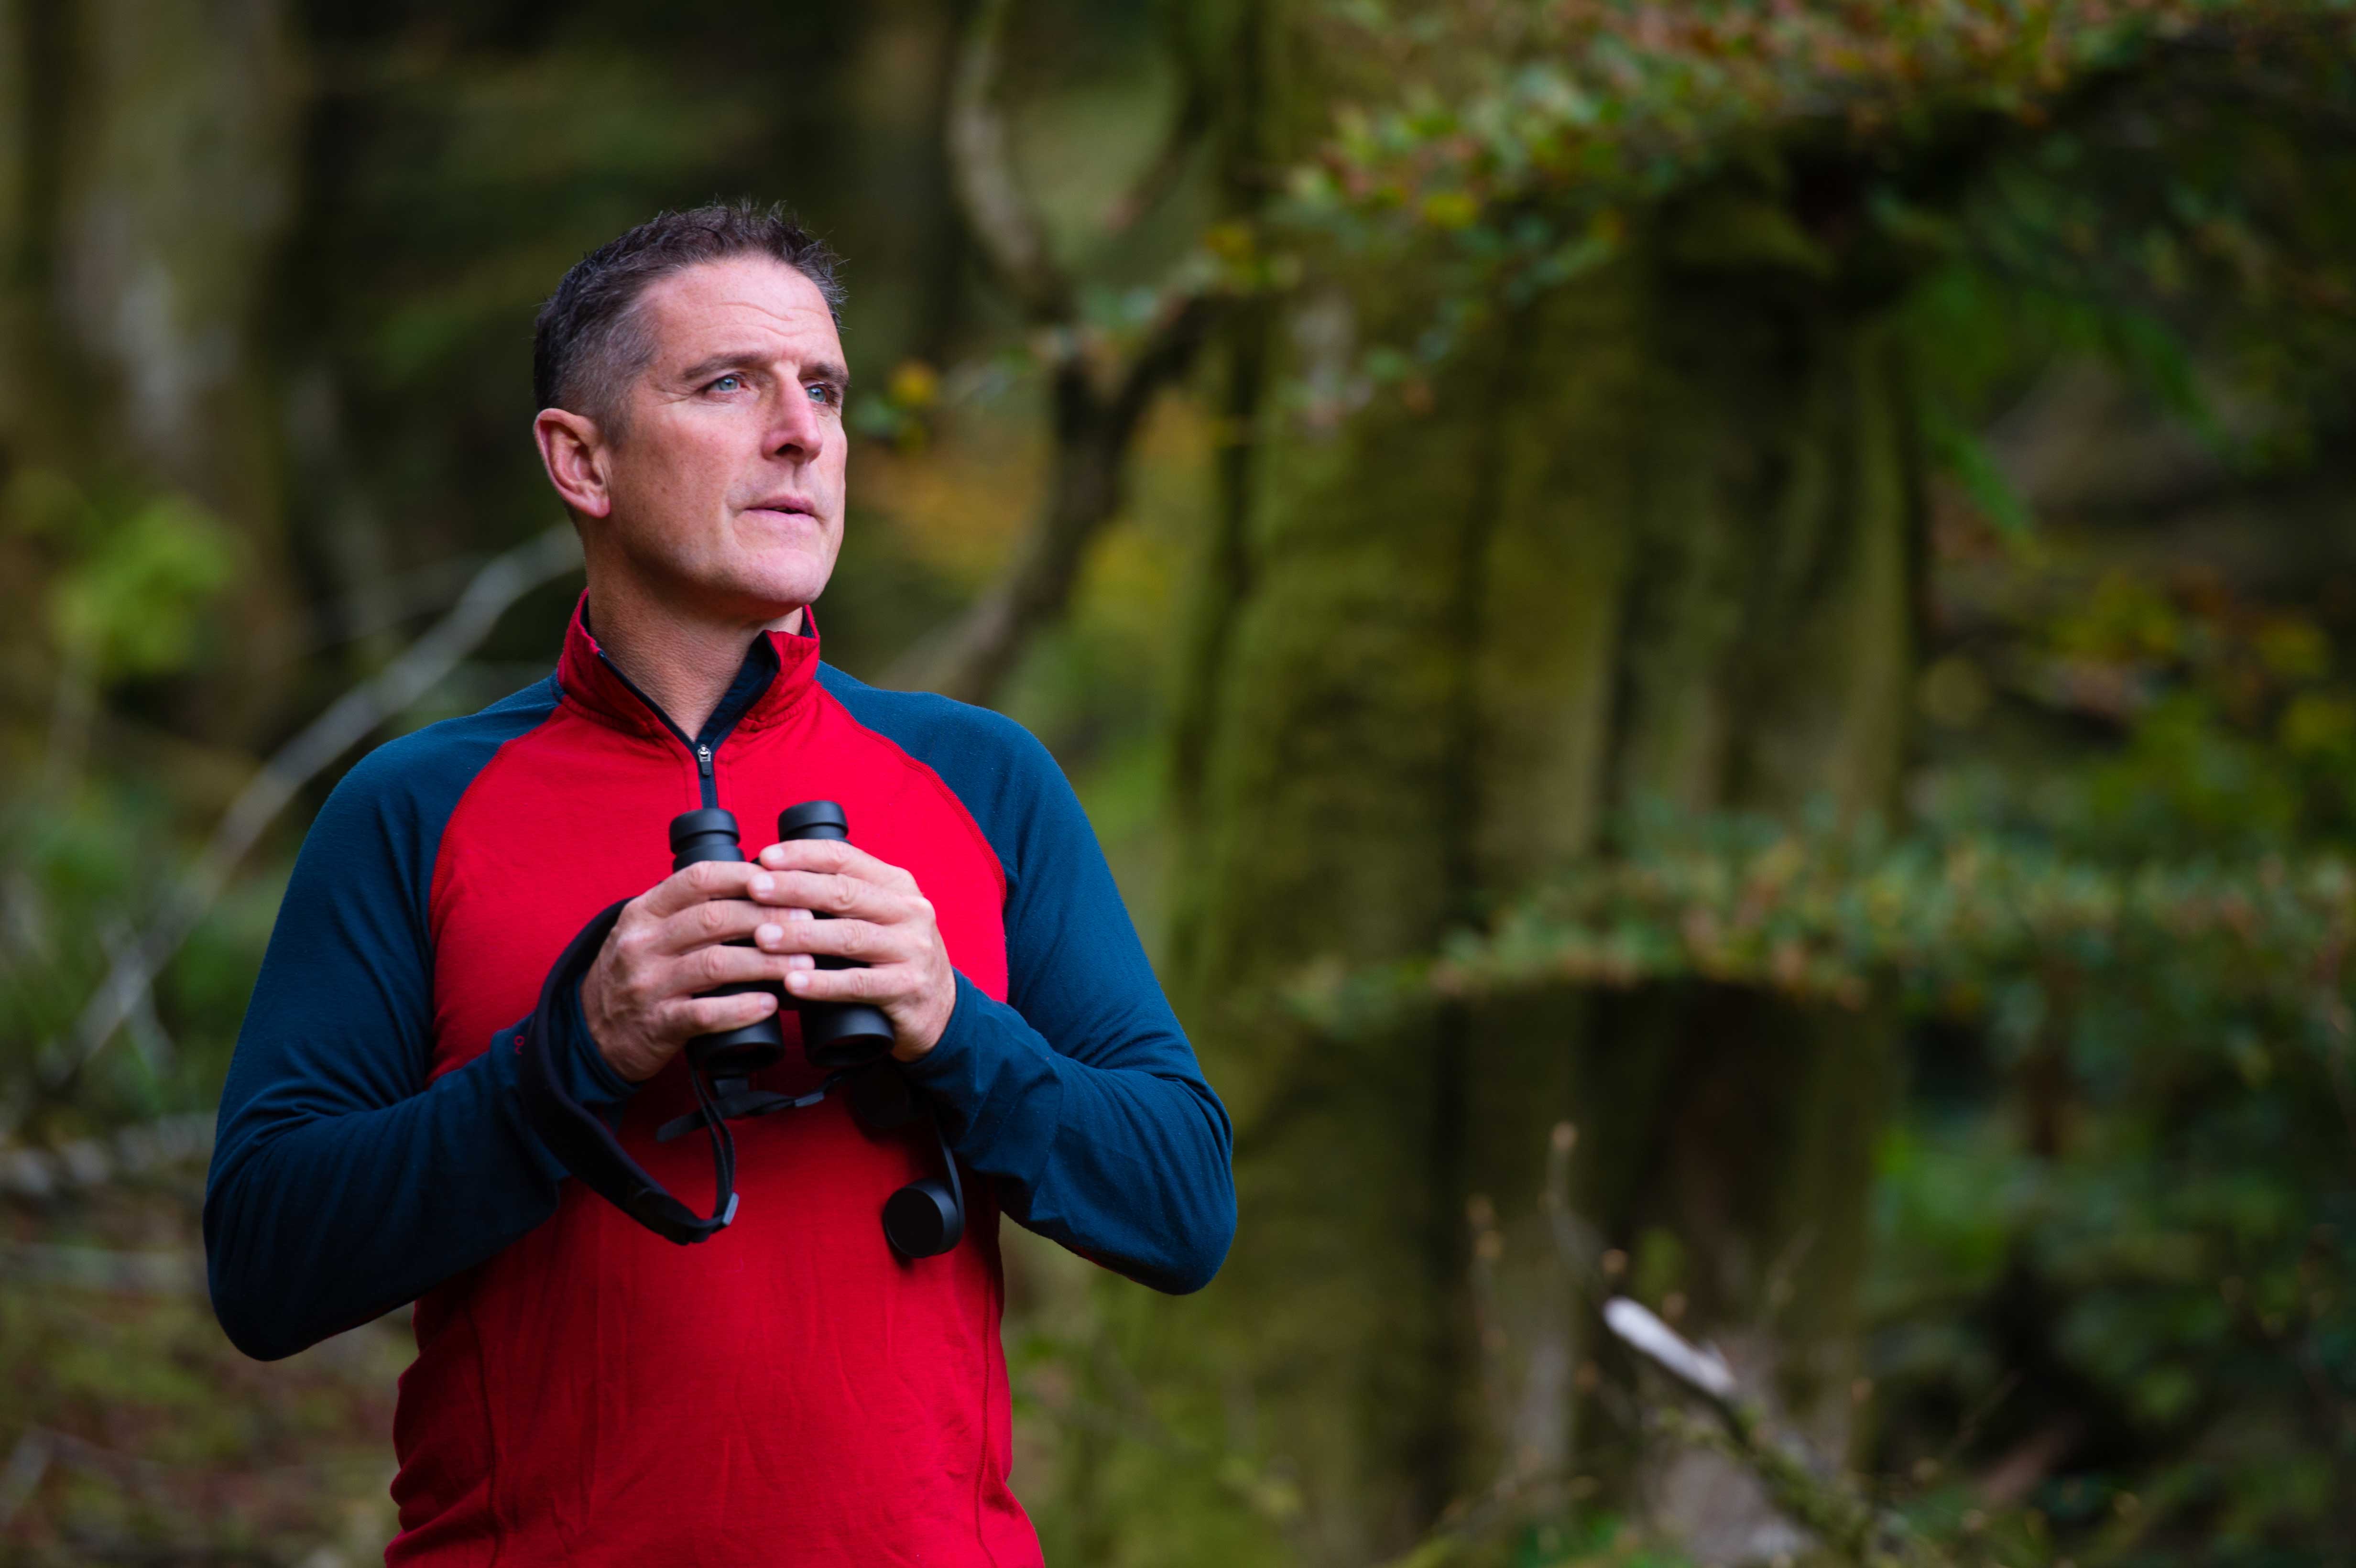 Naturalist and tv presenter Iolo Williams will officially open the Wallace: The Forgotten Evolutionist? exhibition on 8 February 2018.